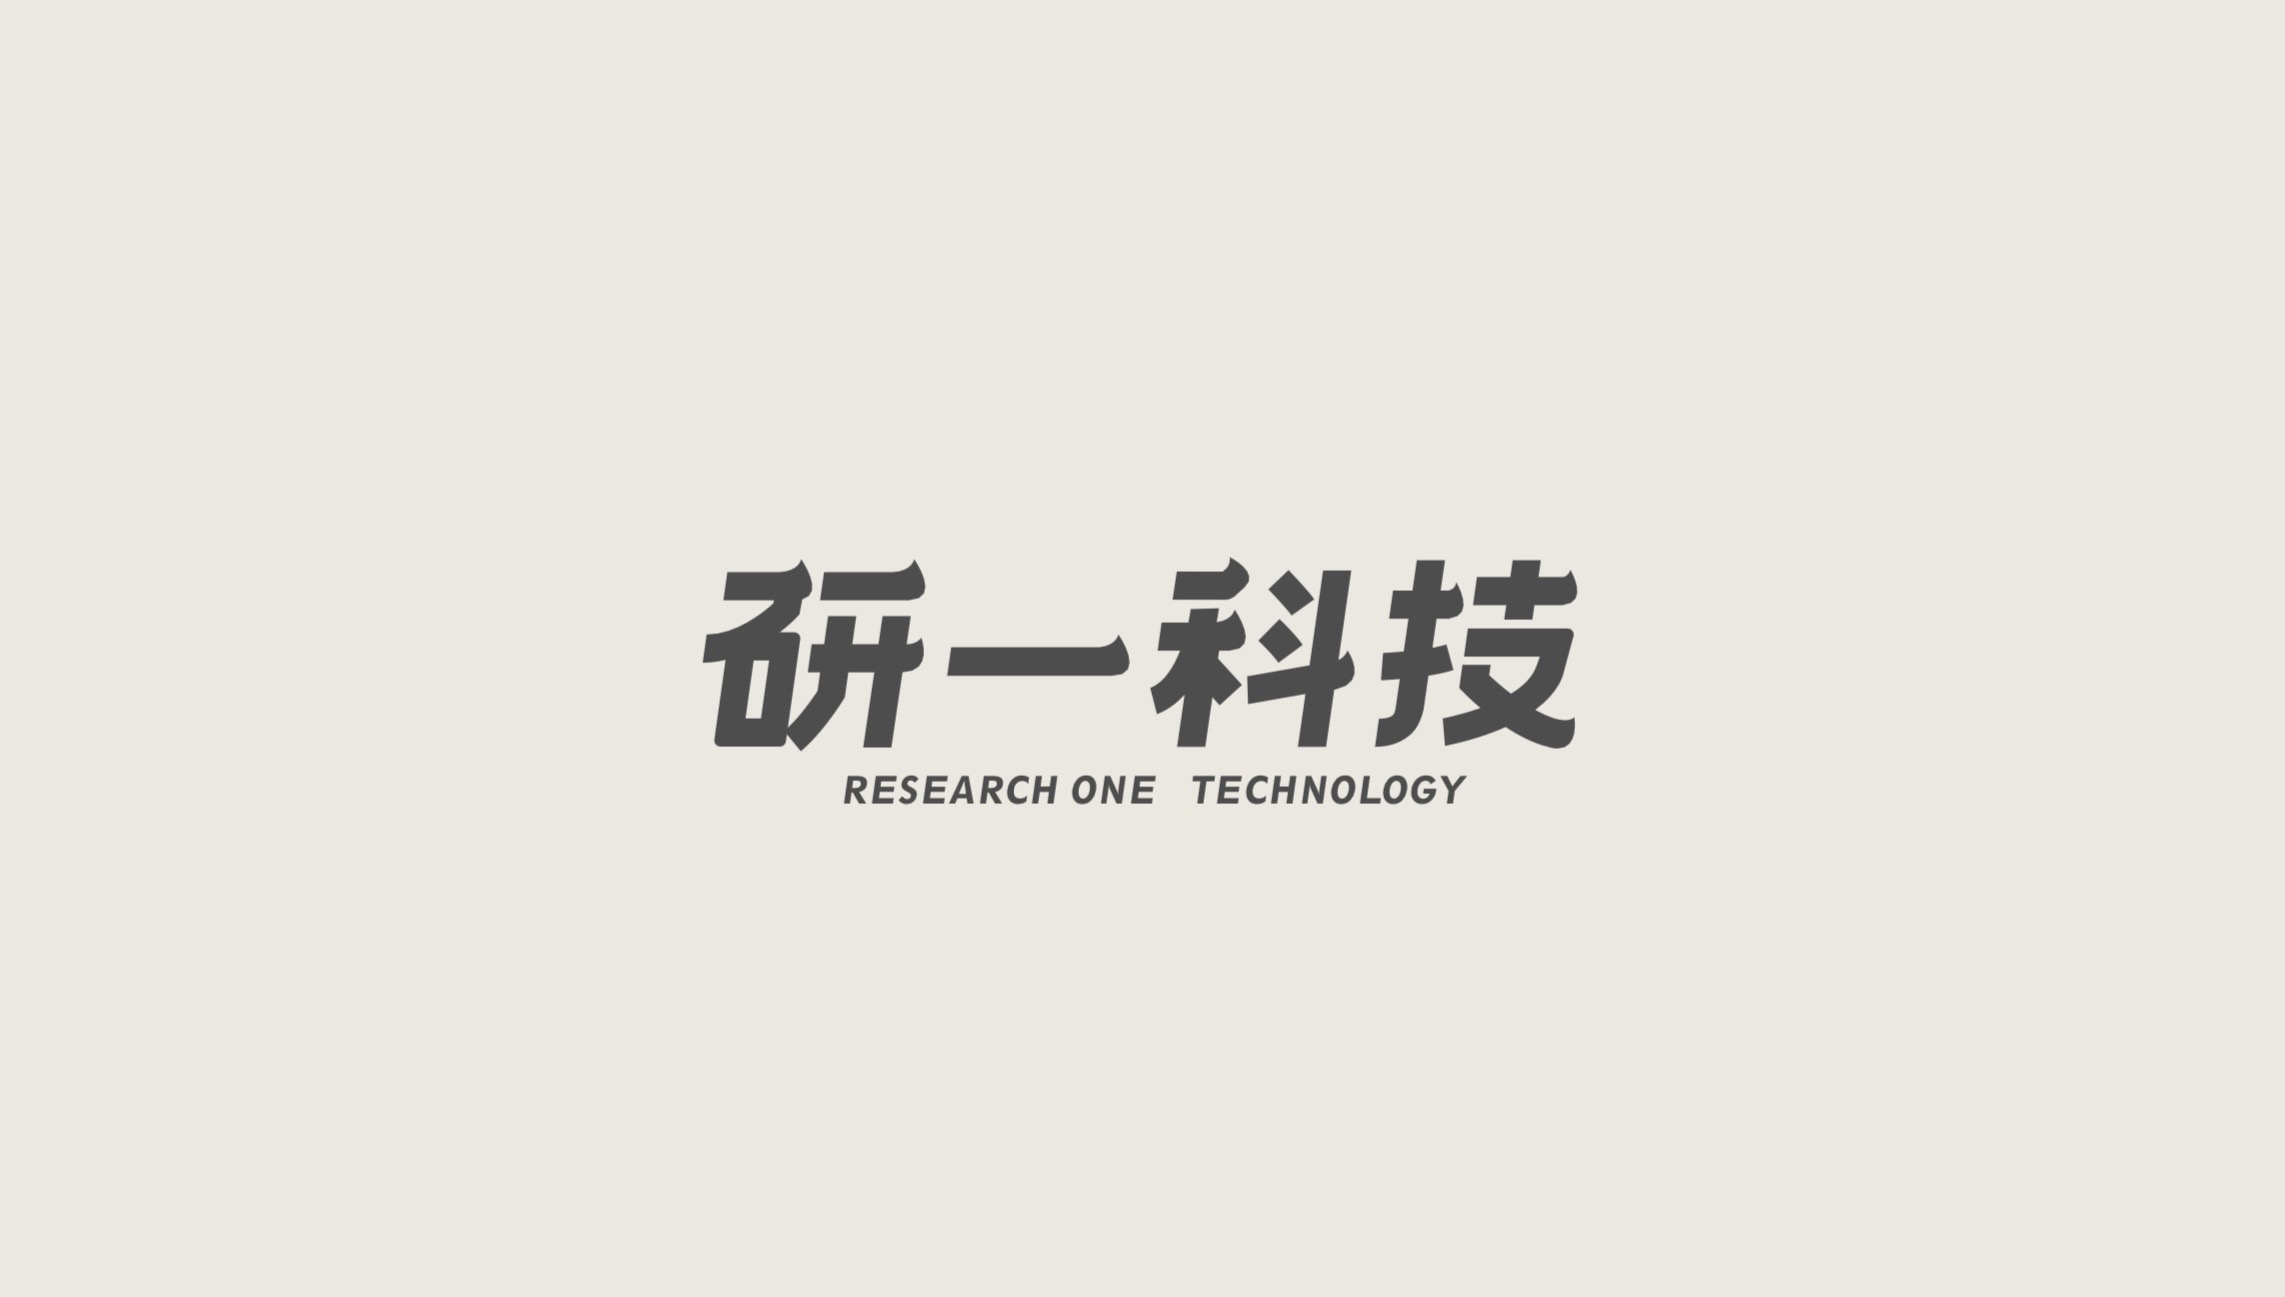 RESEARCH ONE TECHNOLOGY